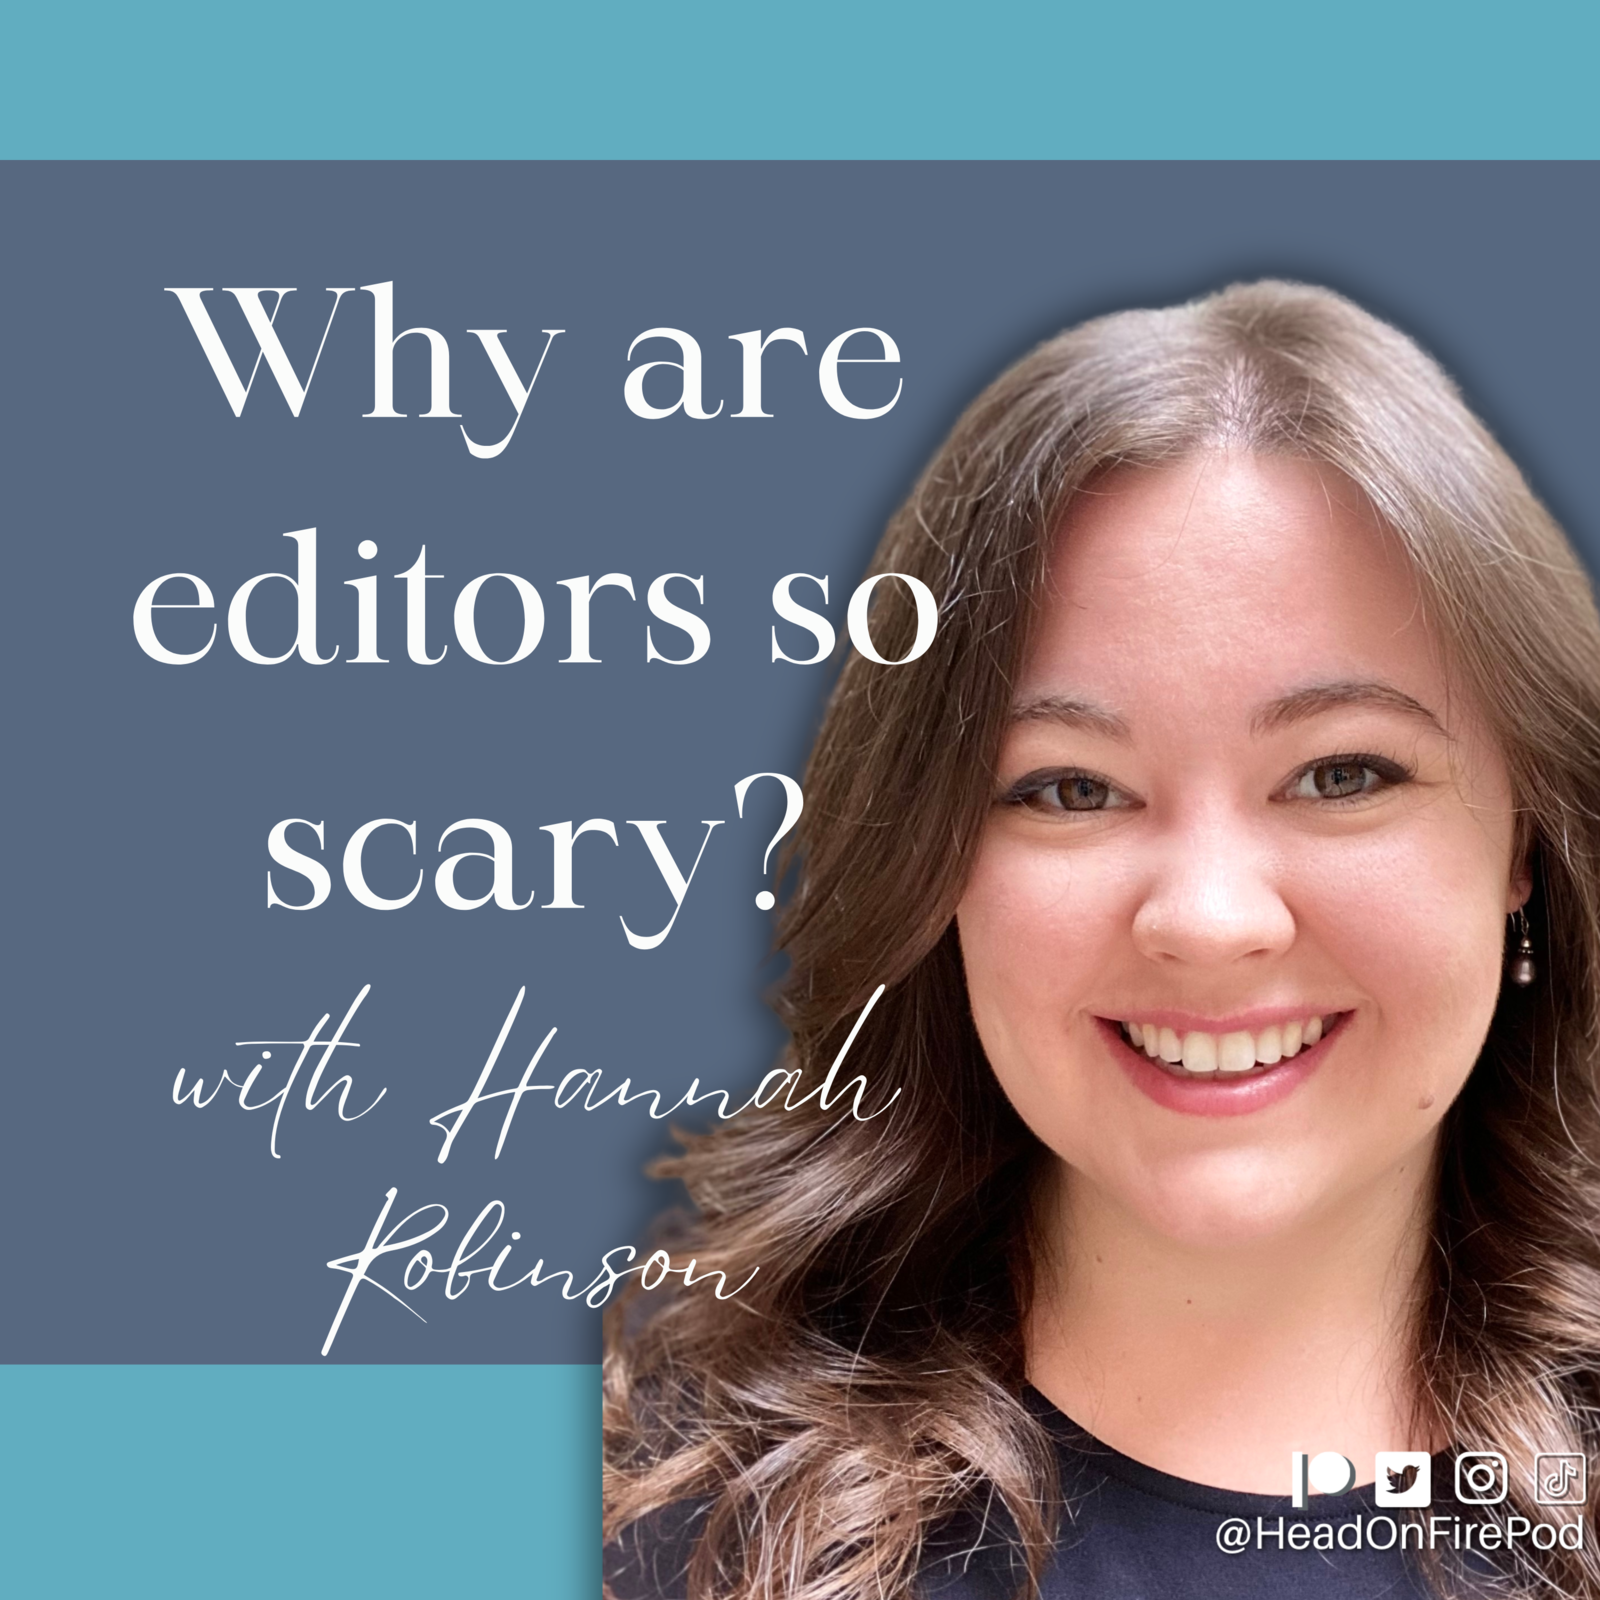 Why are editors so scary? with Hannah Robinson